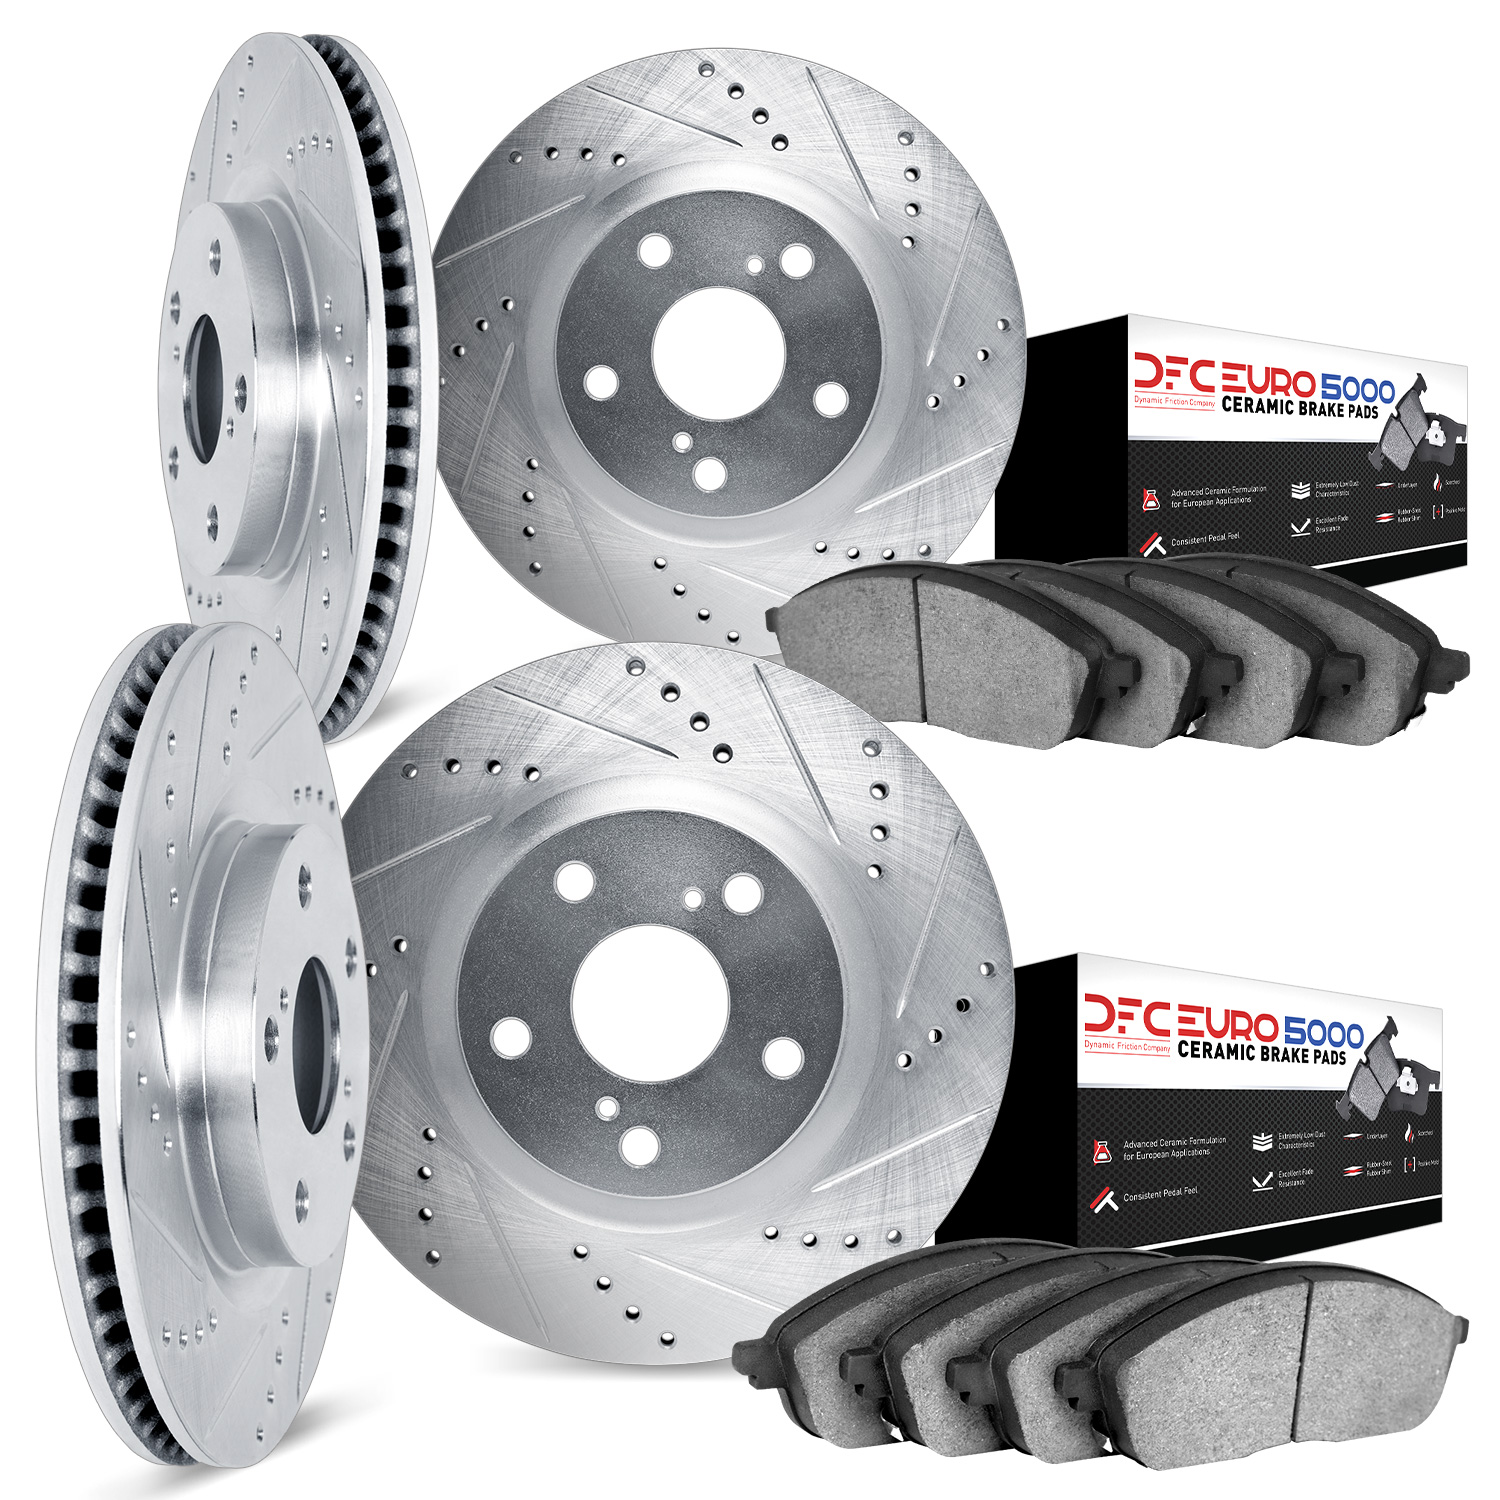 7604-11002 Drilled/Slotted Brake Rotors w/5000 Euro Ceramic Brake Pads Kit [Silver], 2005-2009 Land Rover, Position: Front and R